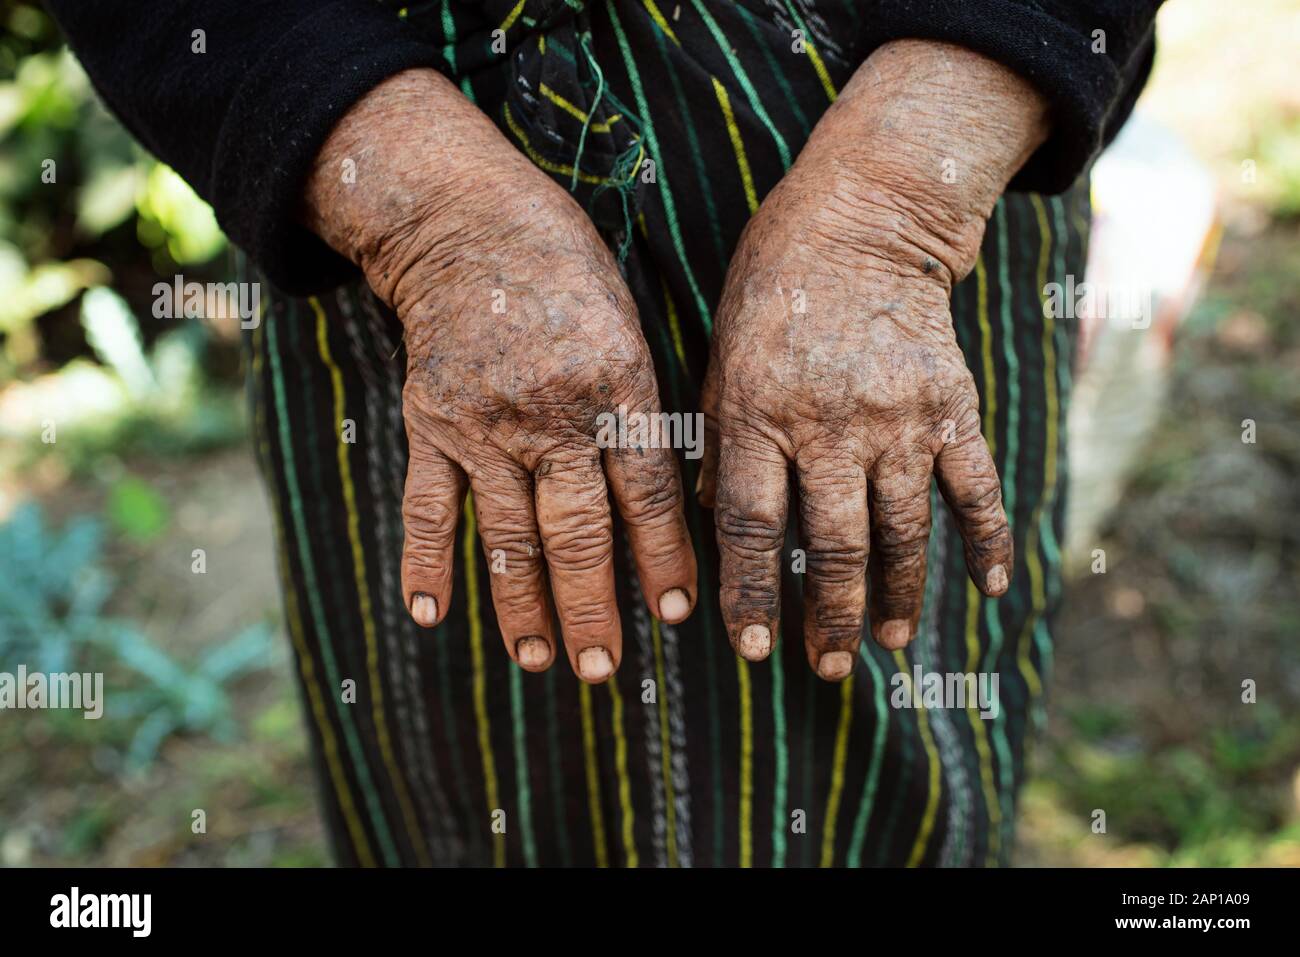 Hands of indigenous elderly woman. She is working 5am - 8pm daily on a coffee plantation near Calle San Lazaro, Antigua, Guatemala. Jan 2019 Stock Photo